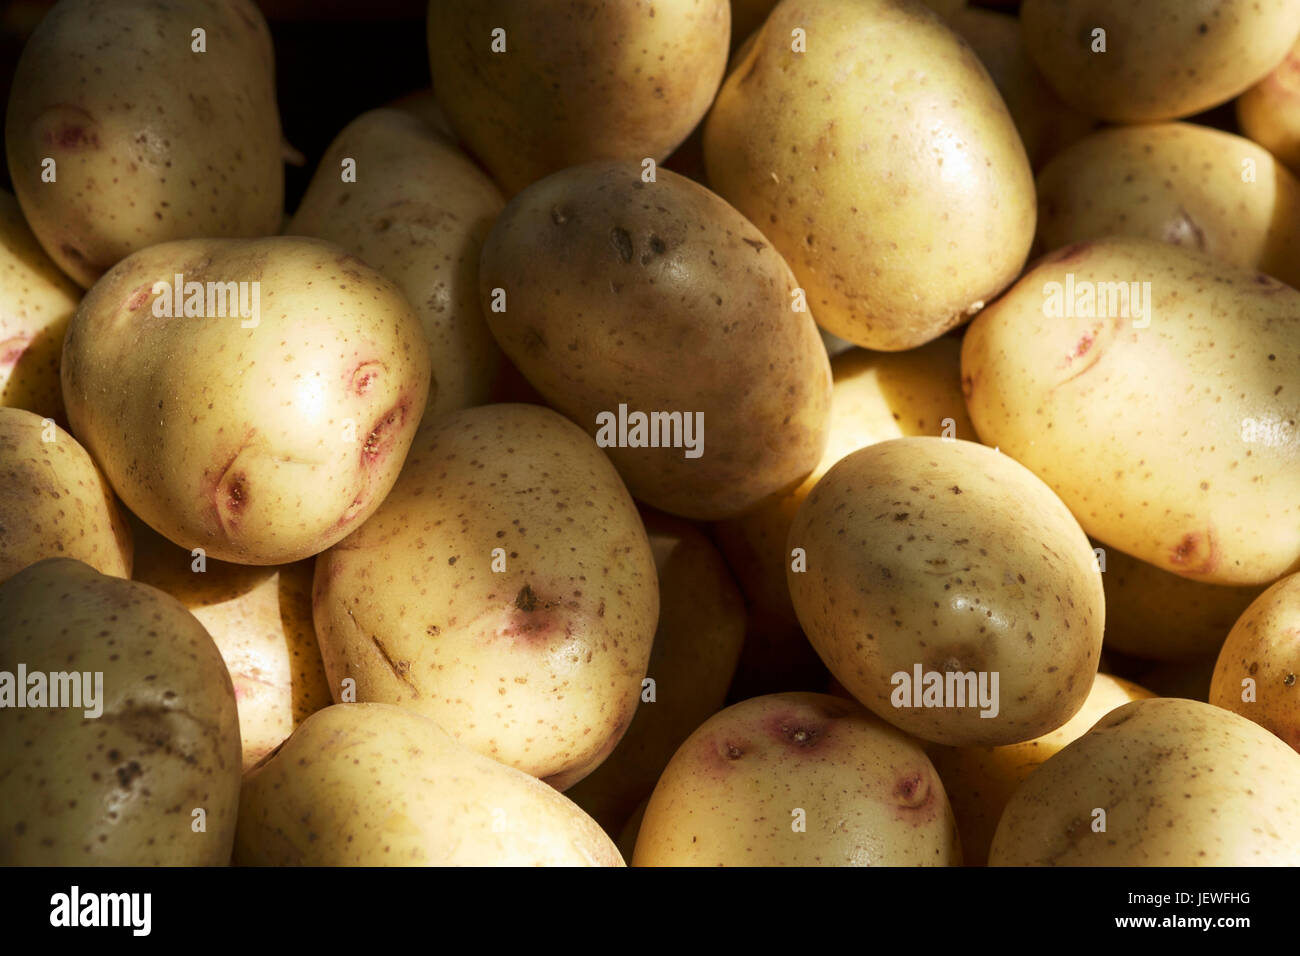 Spuds, jacket potatoes, staple foods, rising food prices. Inflation. Stock Photo